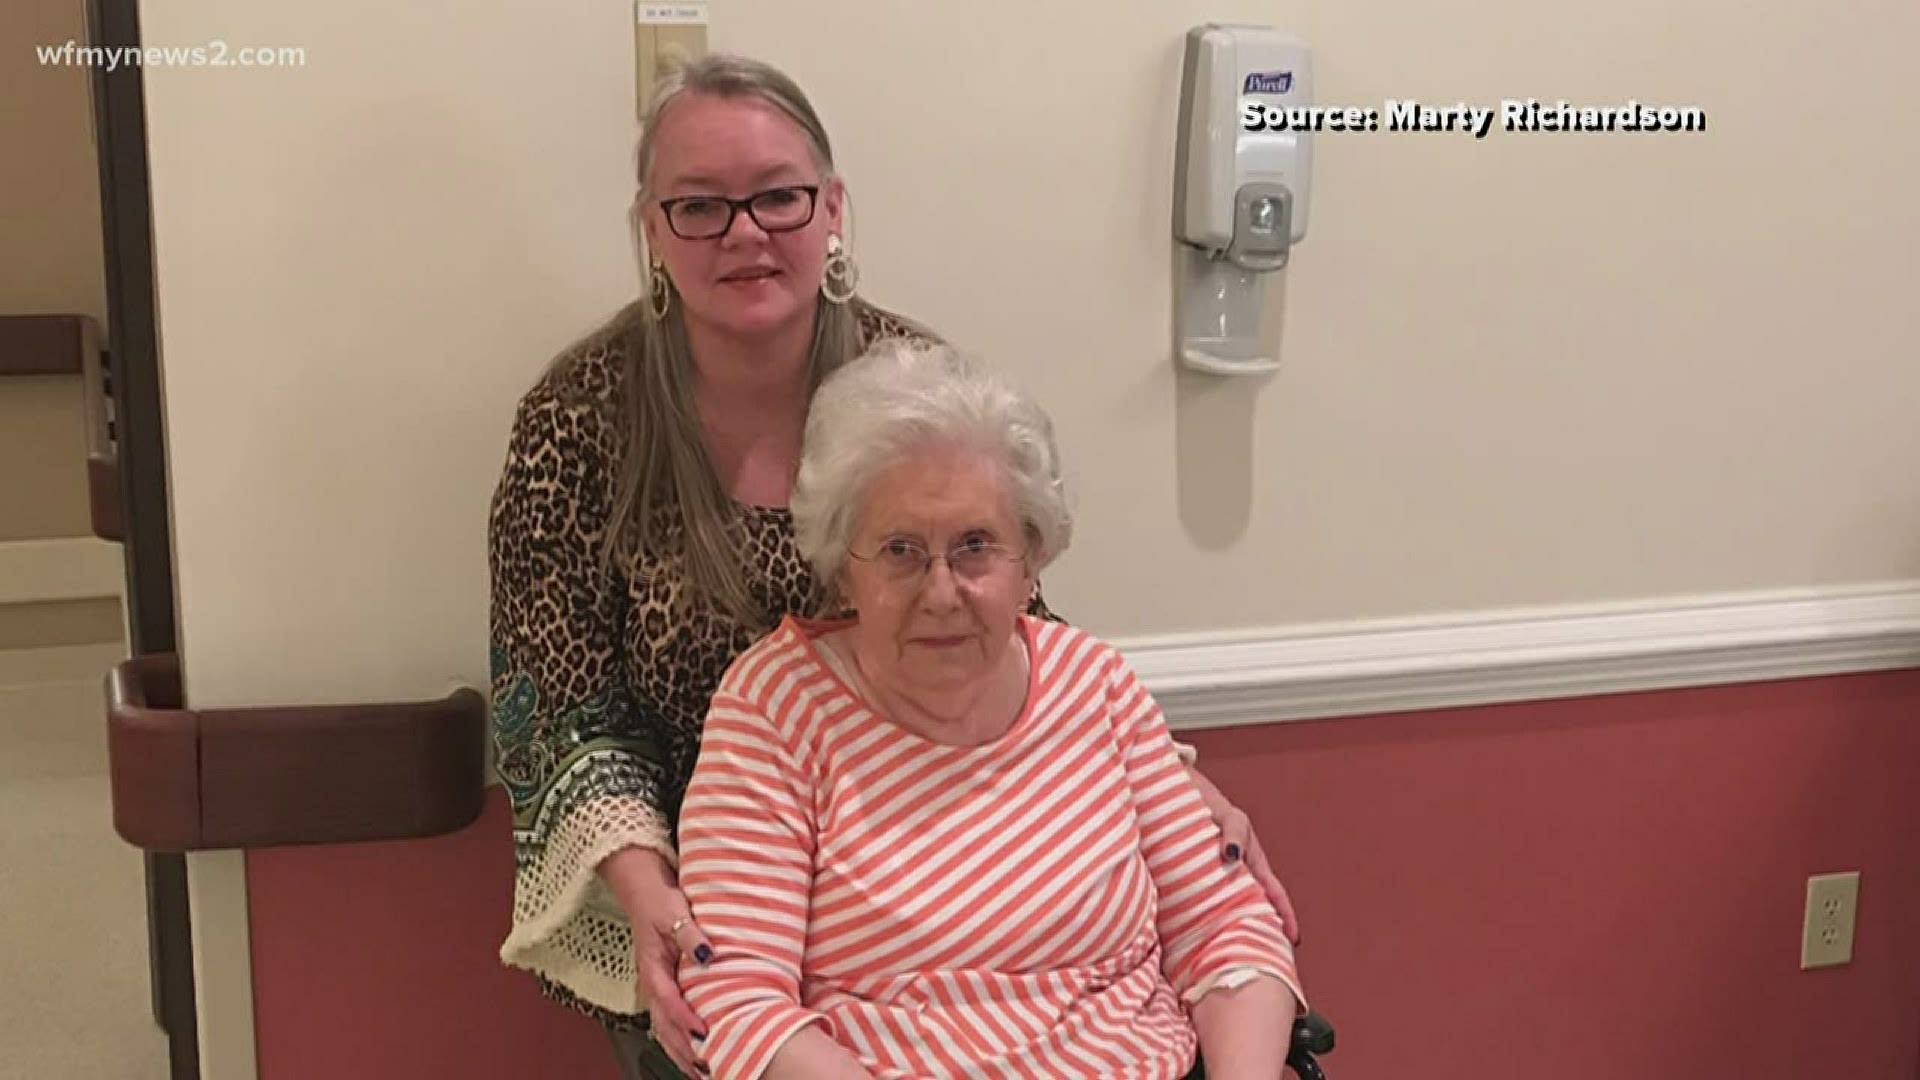 The last time Marty Richardson visited her mother at Camden Heath and Rehab was March 12.
Since then, more people at the Greensboro facility have tested positive.